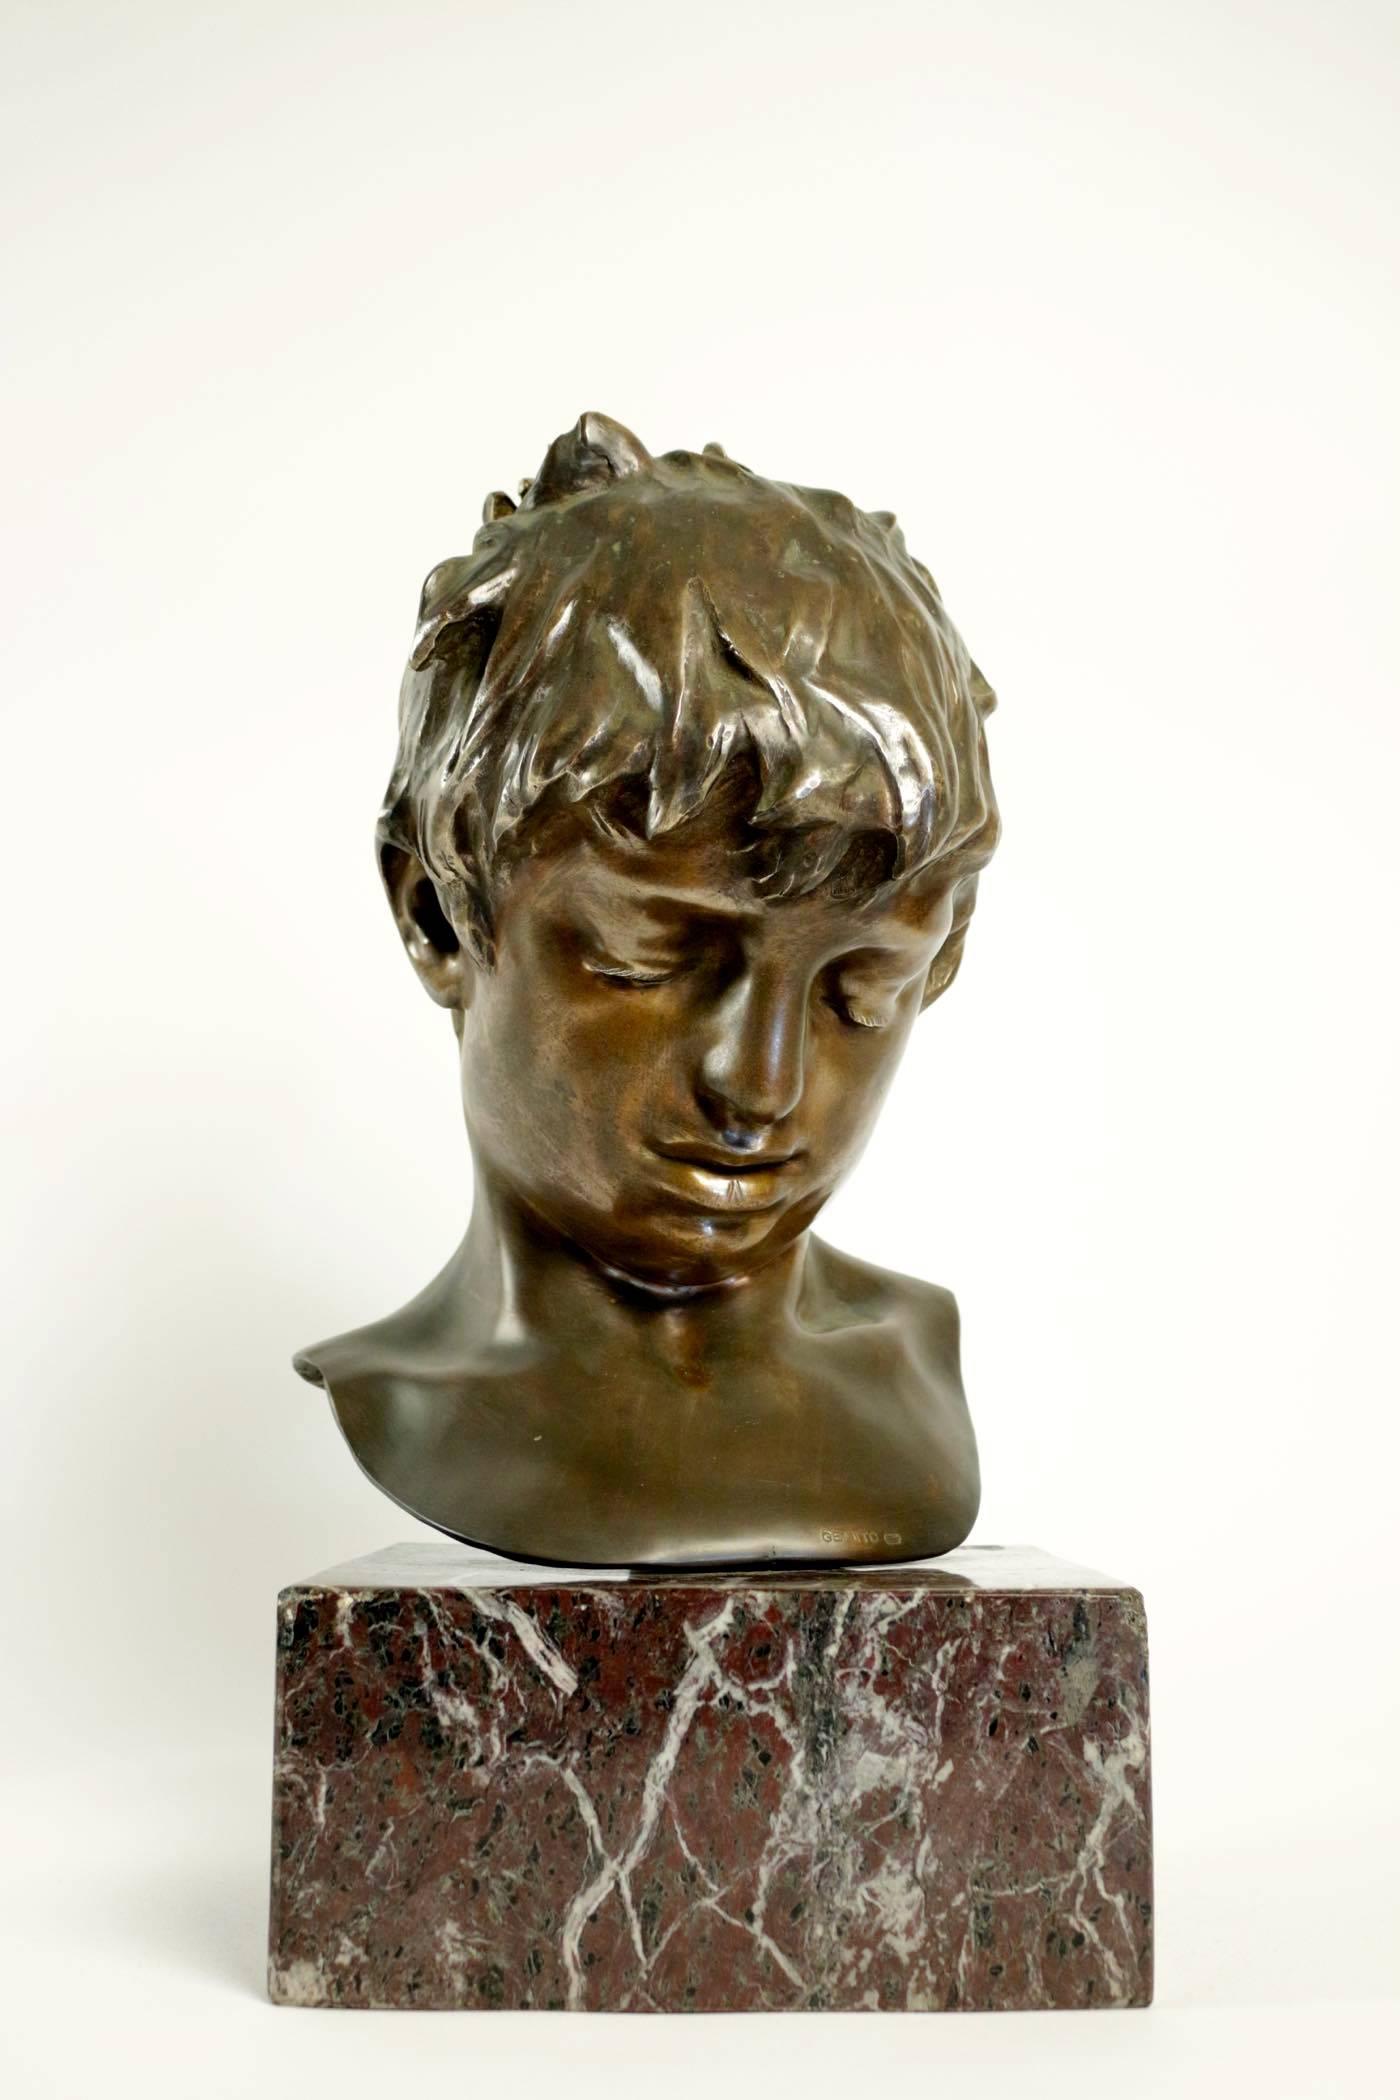 1880s bronze head of a Sicilian adolescent boy set on a marble base, signed by Vincenzo Gemito, (1852-1929).
Artist can be looked up on the Be´ne´zit refererence book.
Some of this artist's works are exhibited at the Musee d'Orsay in